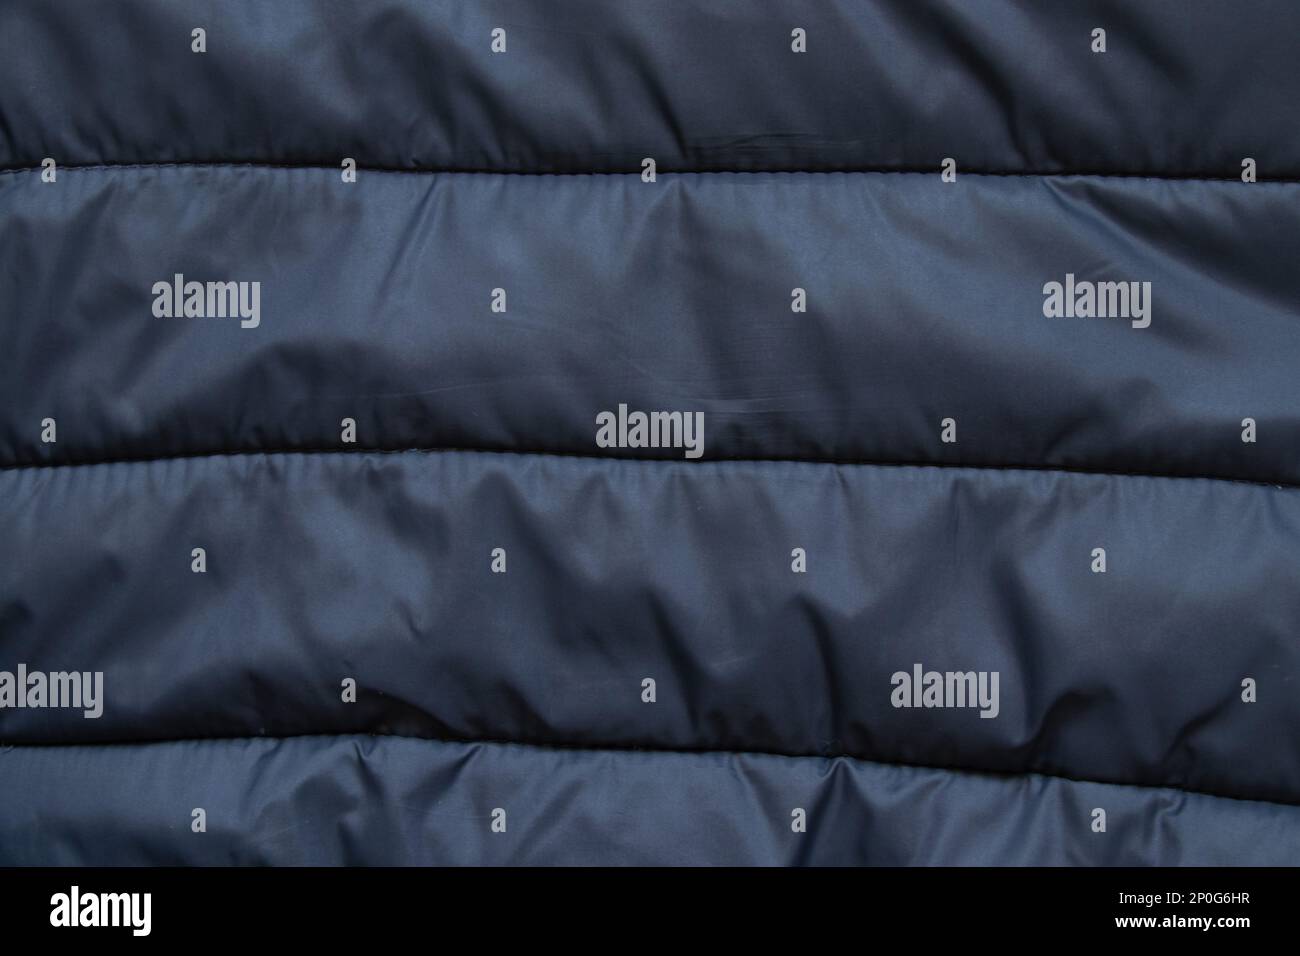 black puffer jacket material as background Stock Photo - Alamy